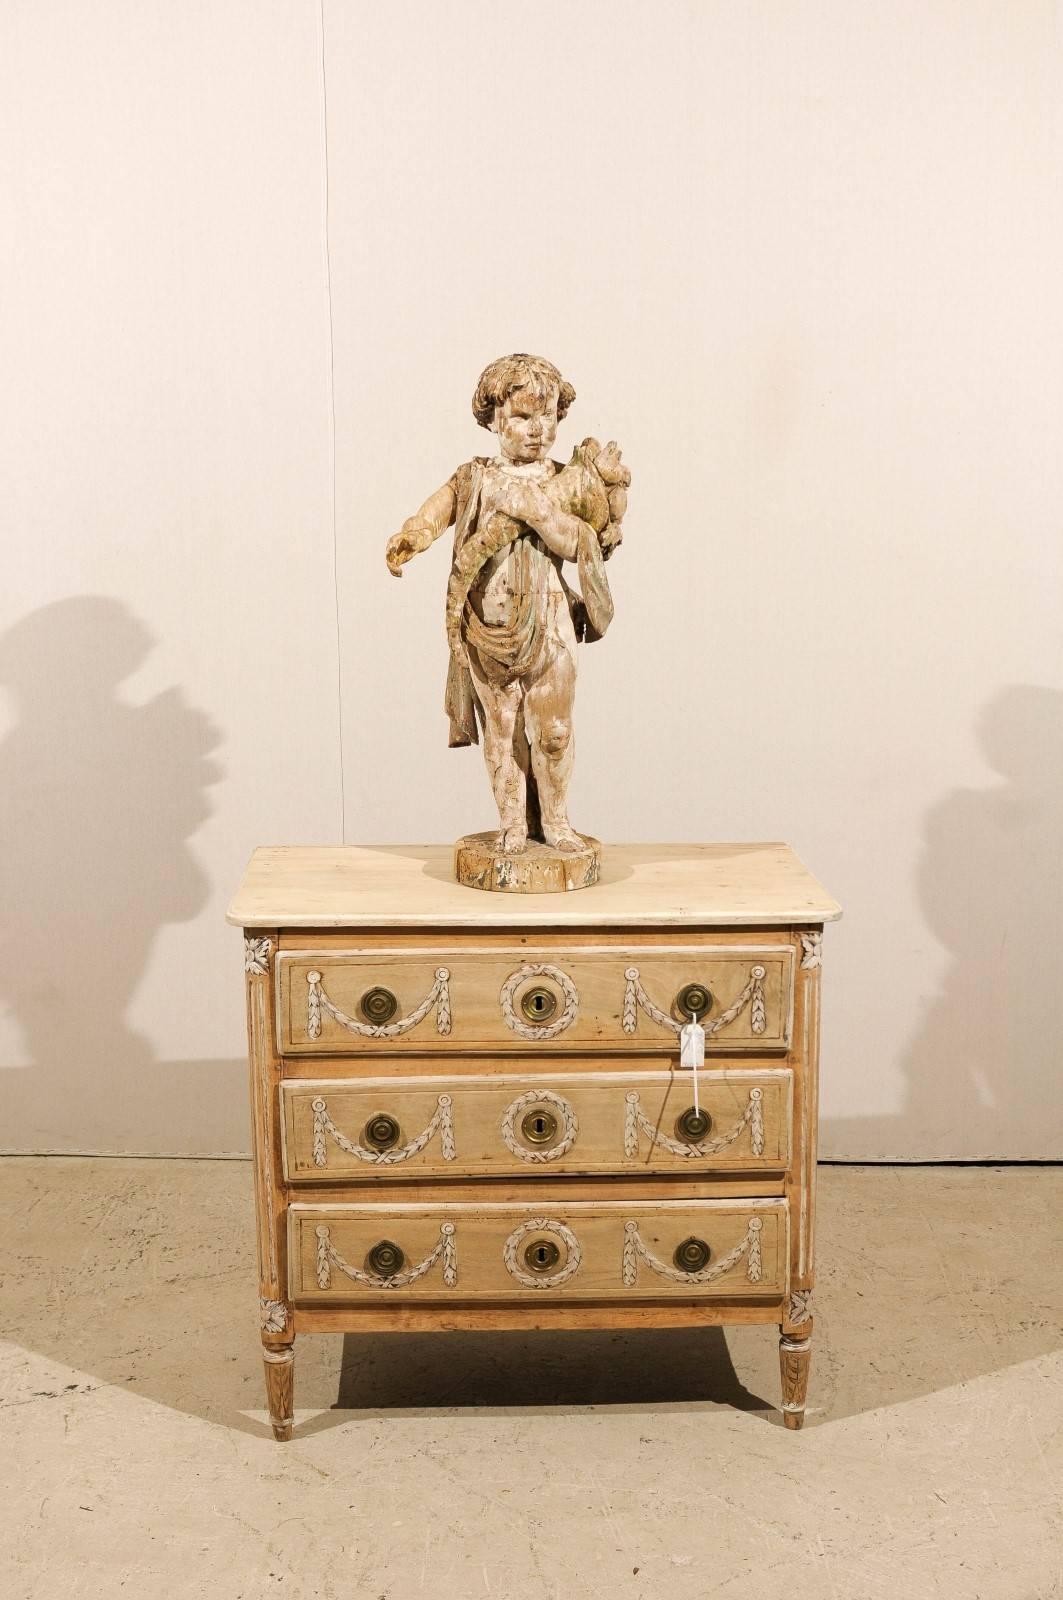 An Italian 18th century carved wood putto/cherub statue. This exquisite statue represents a putto figure in a walking stance, holding a cornucopia, symbol of abundance and prosperity. The figure, raised on a round base, is also adorned with a